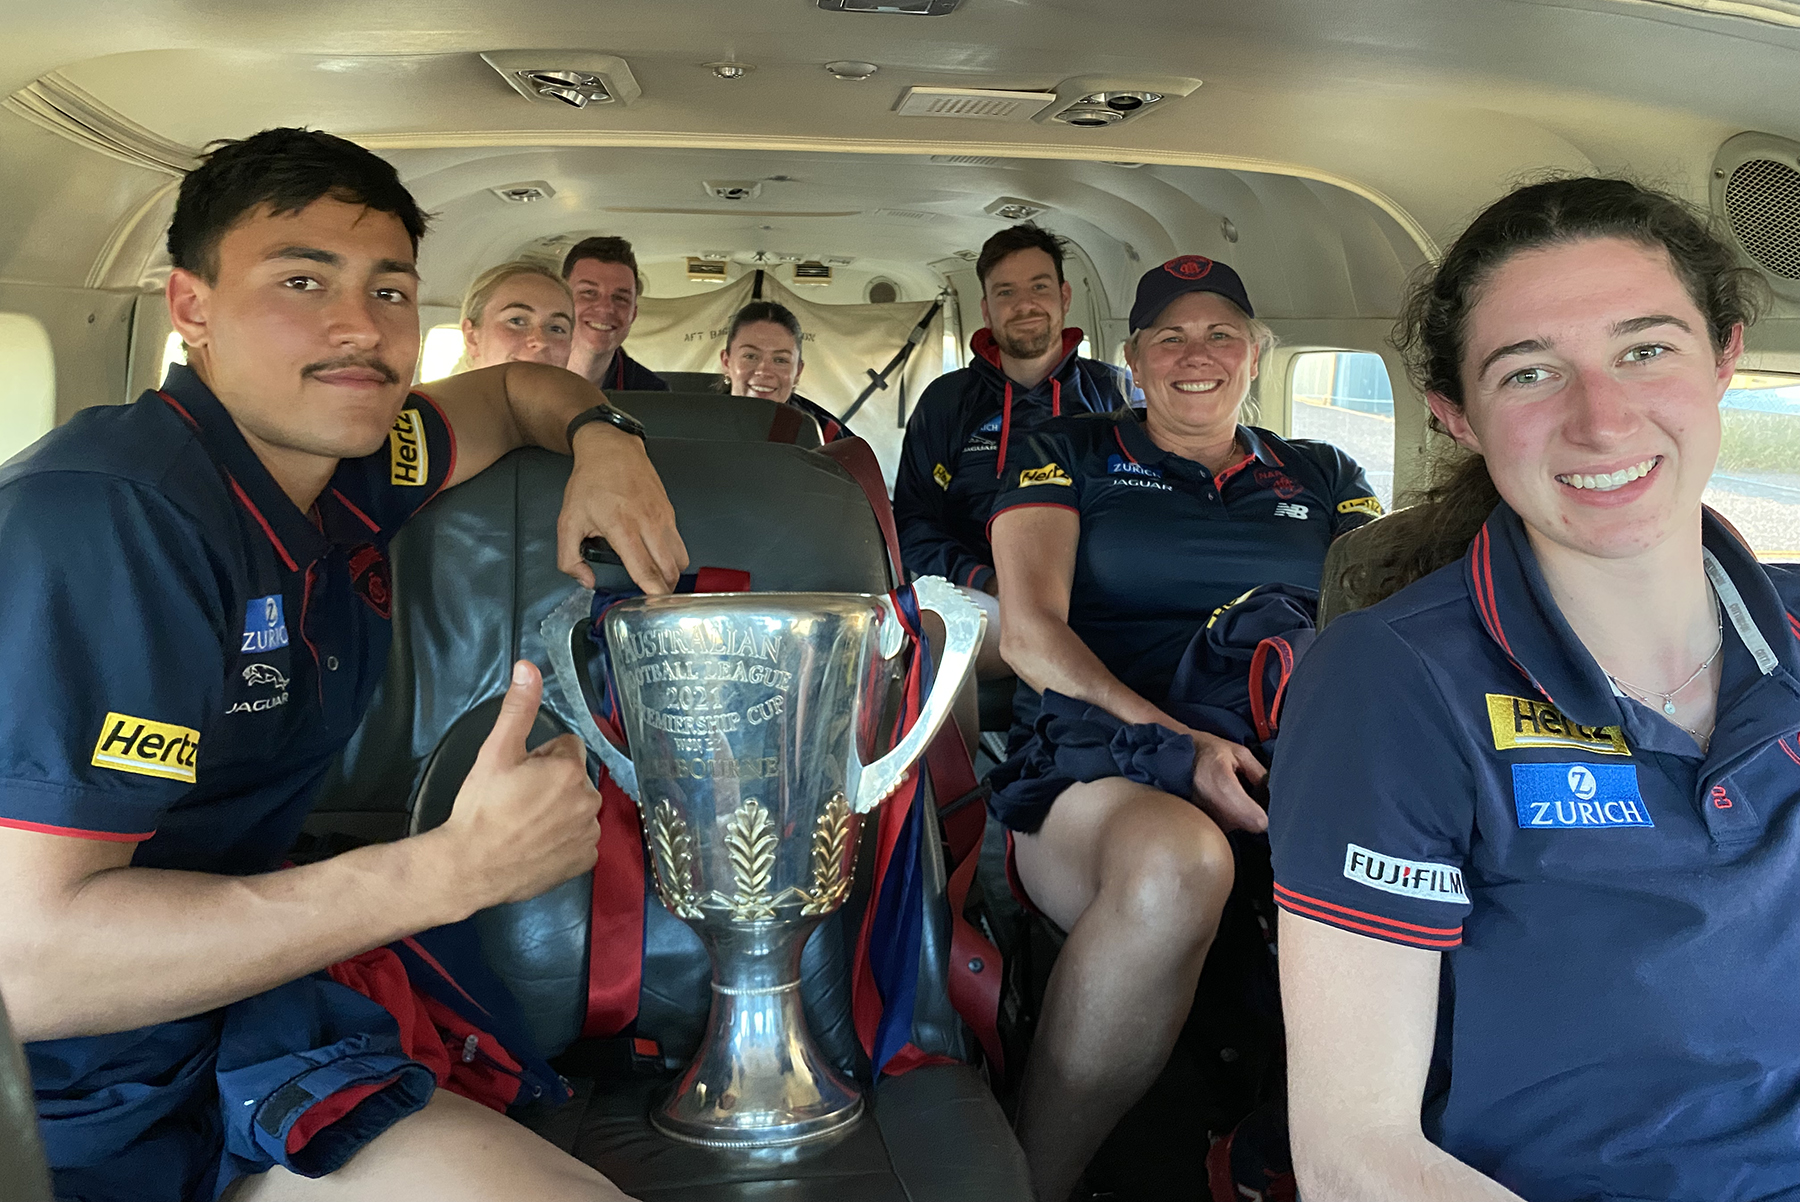 MFC crew on the plane with the premiership cup on the seat